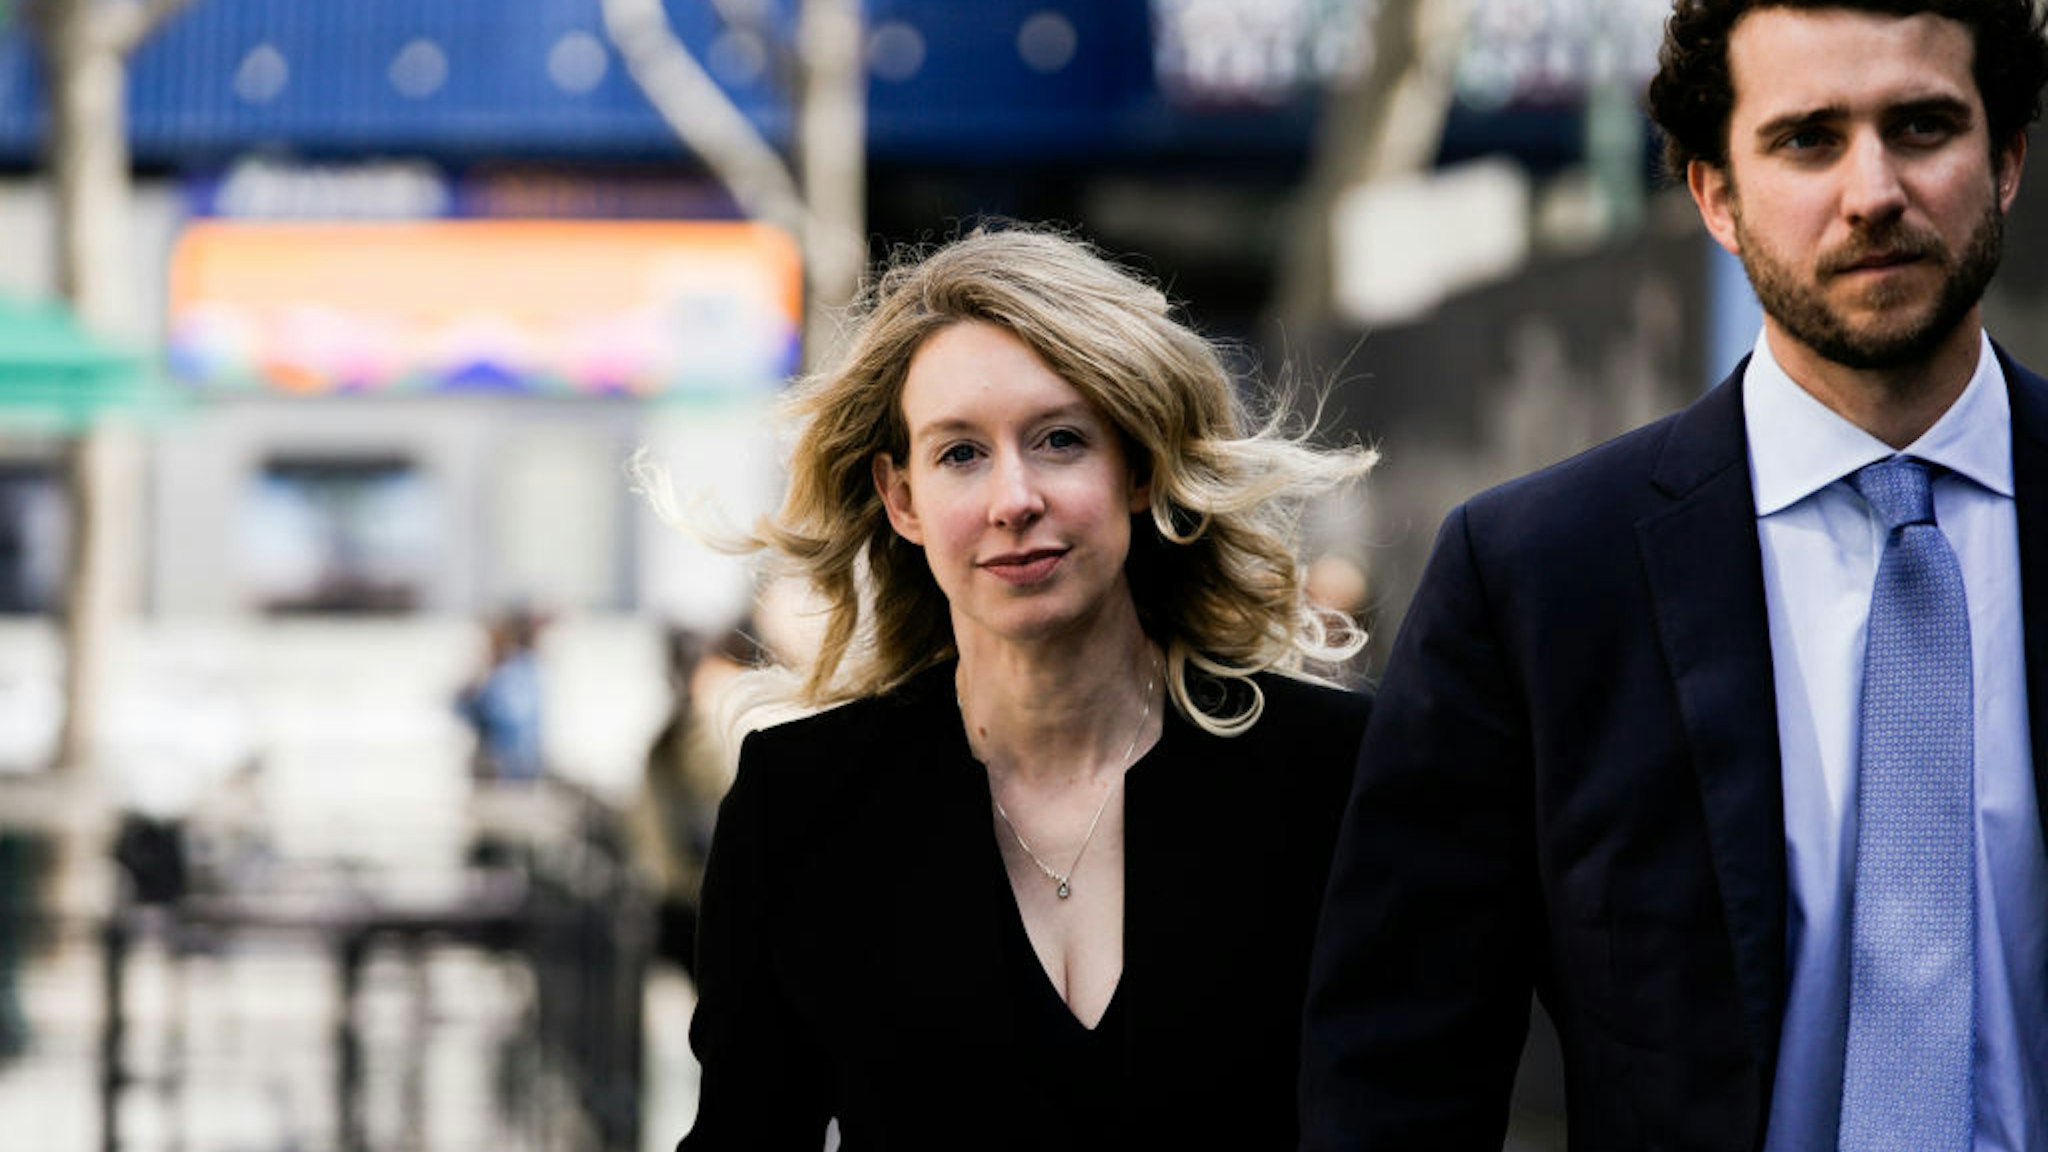 Disgraced Theranos Founder Elizabeth Holmes Appears In Court For A Restitution Hearing